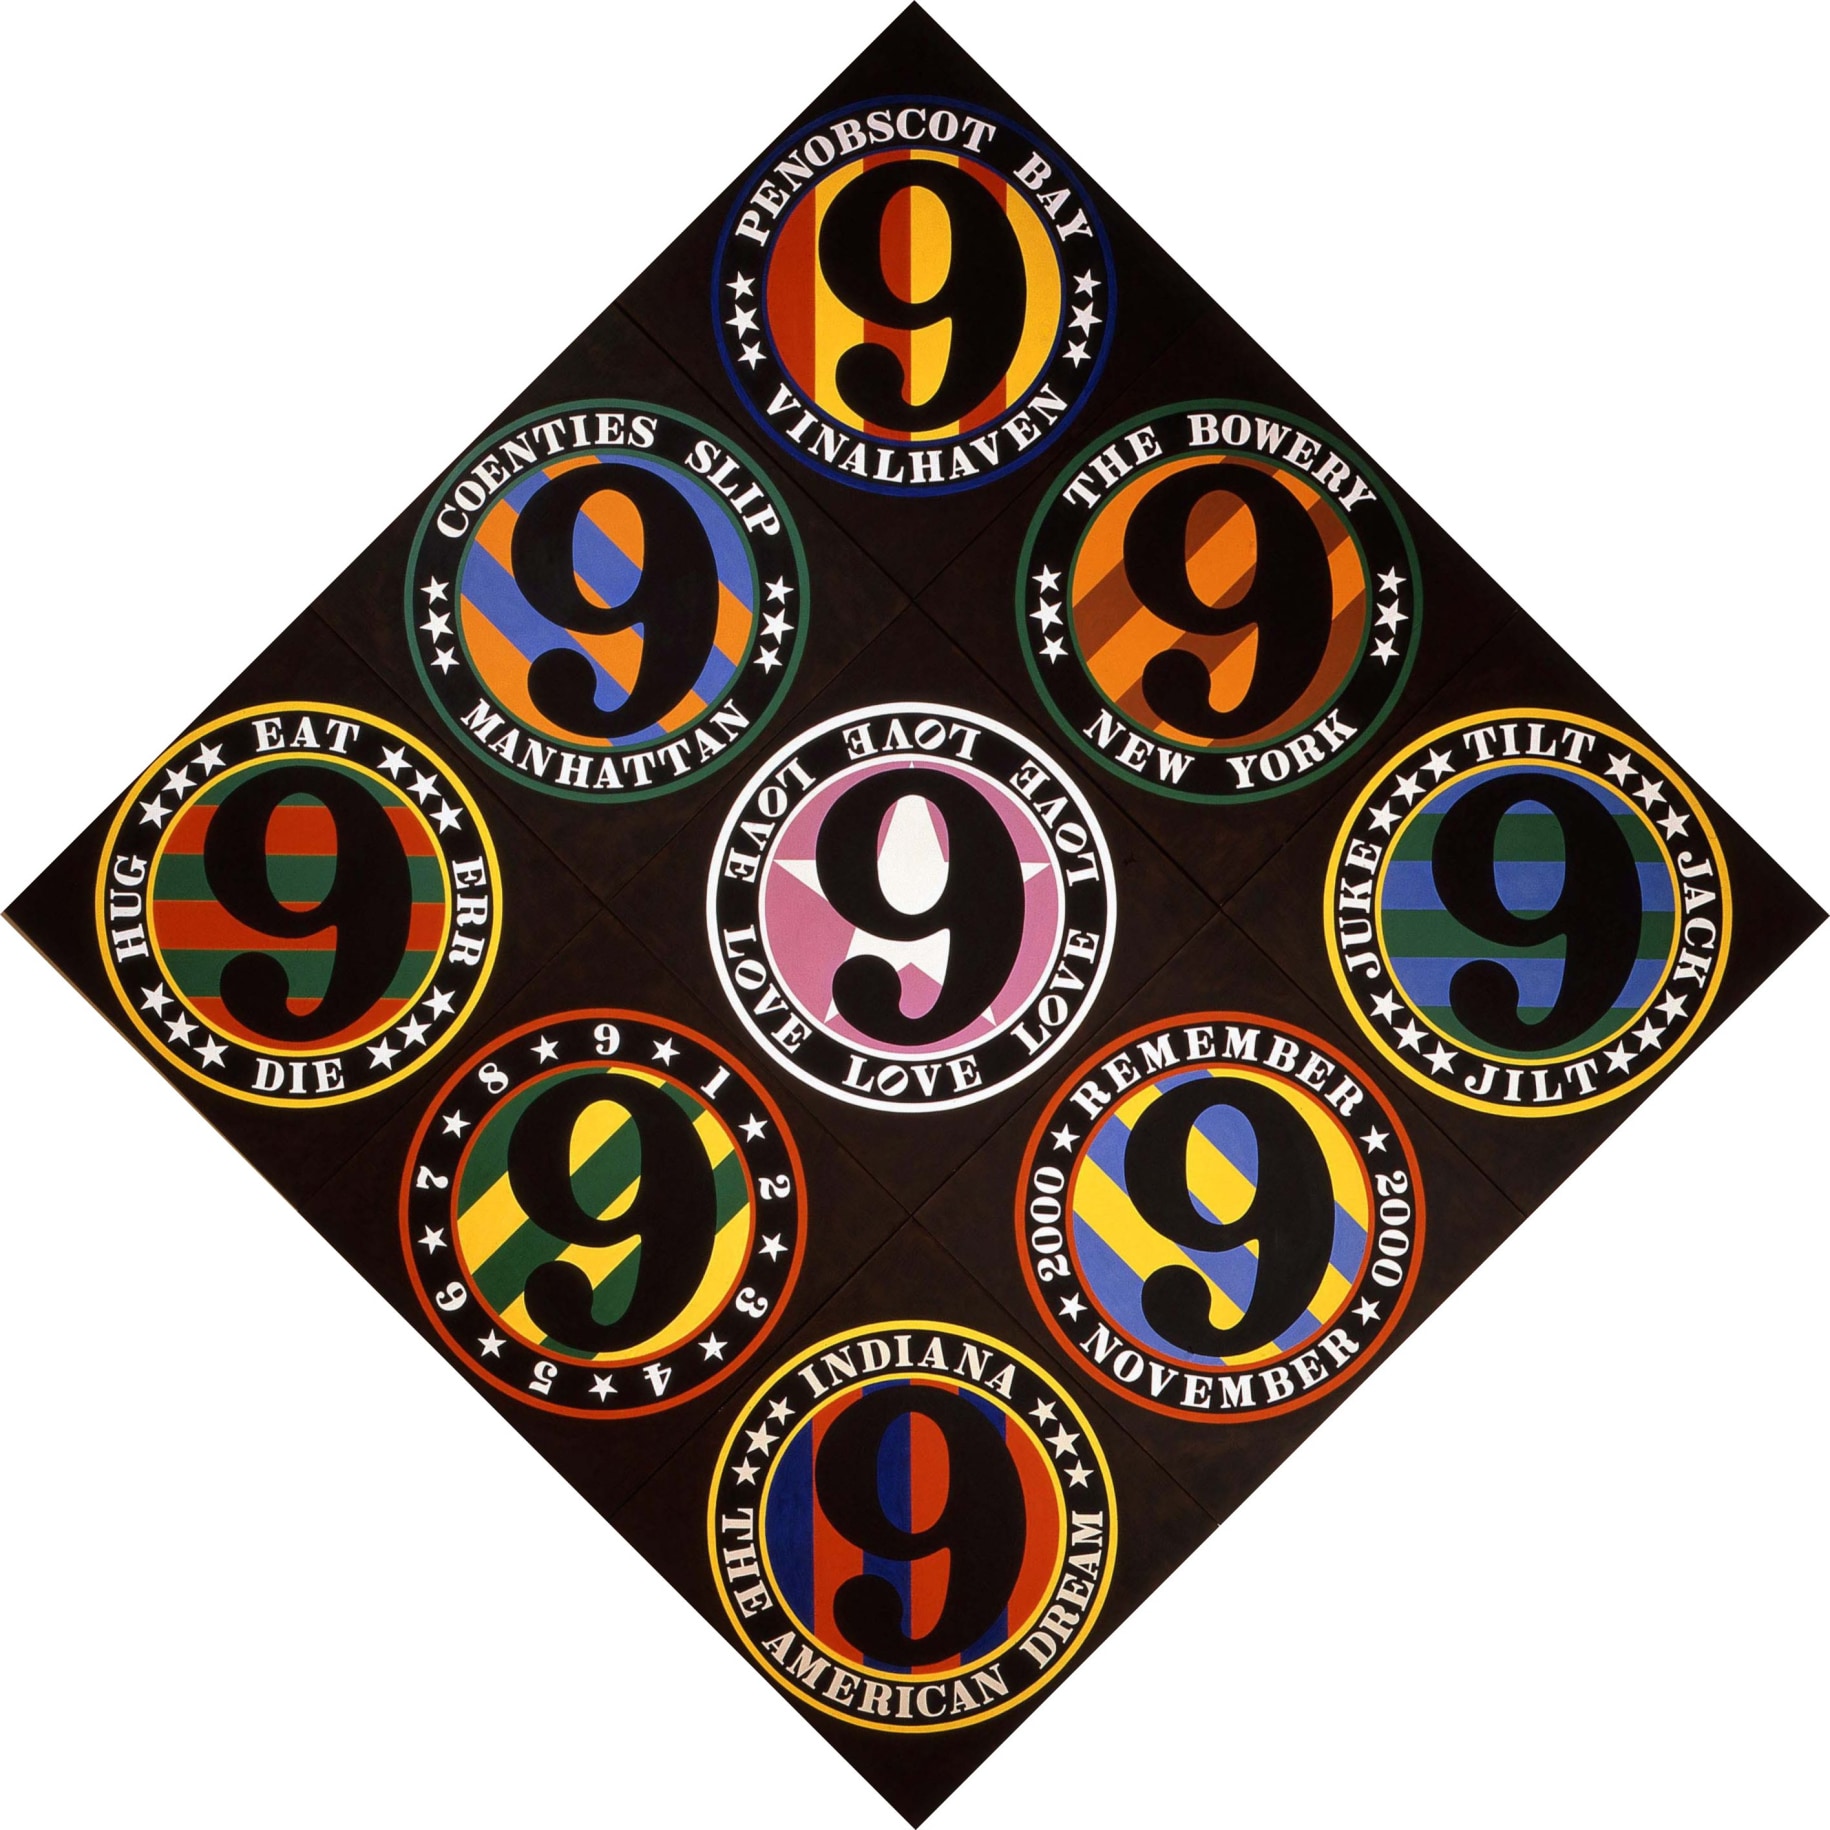 The Ninth American Dream is a diamond shaped painting made up of nine panels, measuring 153 by 153 inches overall. The ground of each panel is black, and each panel is dominated by a circle surrounded by a ring containing text and/or numbers. With the exception of the central panel each circle contains a black numeral nine with a background of two colors of stripes. The central panel contains a black numeral nine against a white star, and the text in the ring is the word &quot;Love&quot; repeated six times. The text and/or numbers in the other rings, clockwise from top reads, &quot;Penobscot Bay Vinalhaven,&quot; &quot;The Bowery New York,&quot; &quot;Tilt, Jack, Jilt, Juke,&quot; &quot;Remember 2000 November 2000,&quot; &quot;Indiana The American Dream,&quot; 1 2 3 4 5 6 7 8 9,&quot; Eat Ear Die Hug,&quot; and &quot;Coenties Slip Manhattan.&quot;